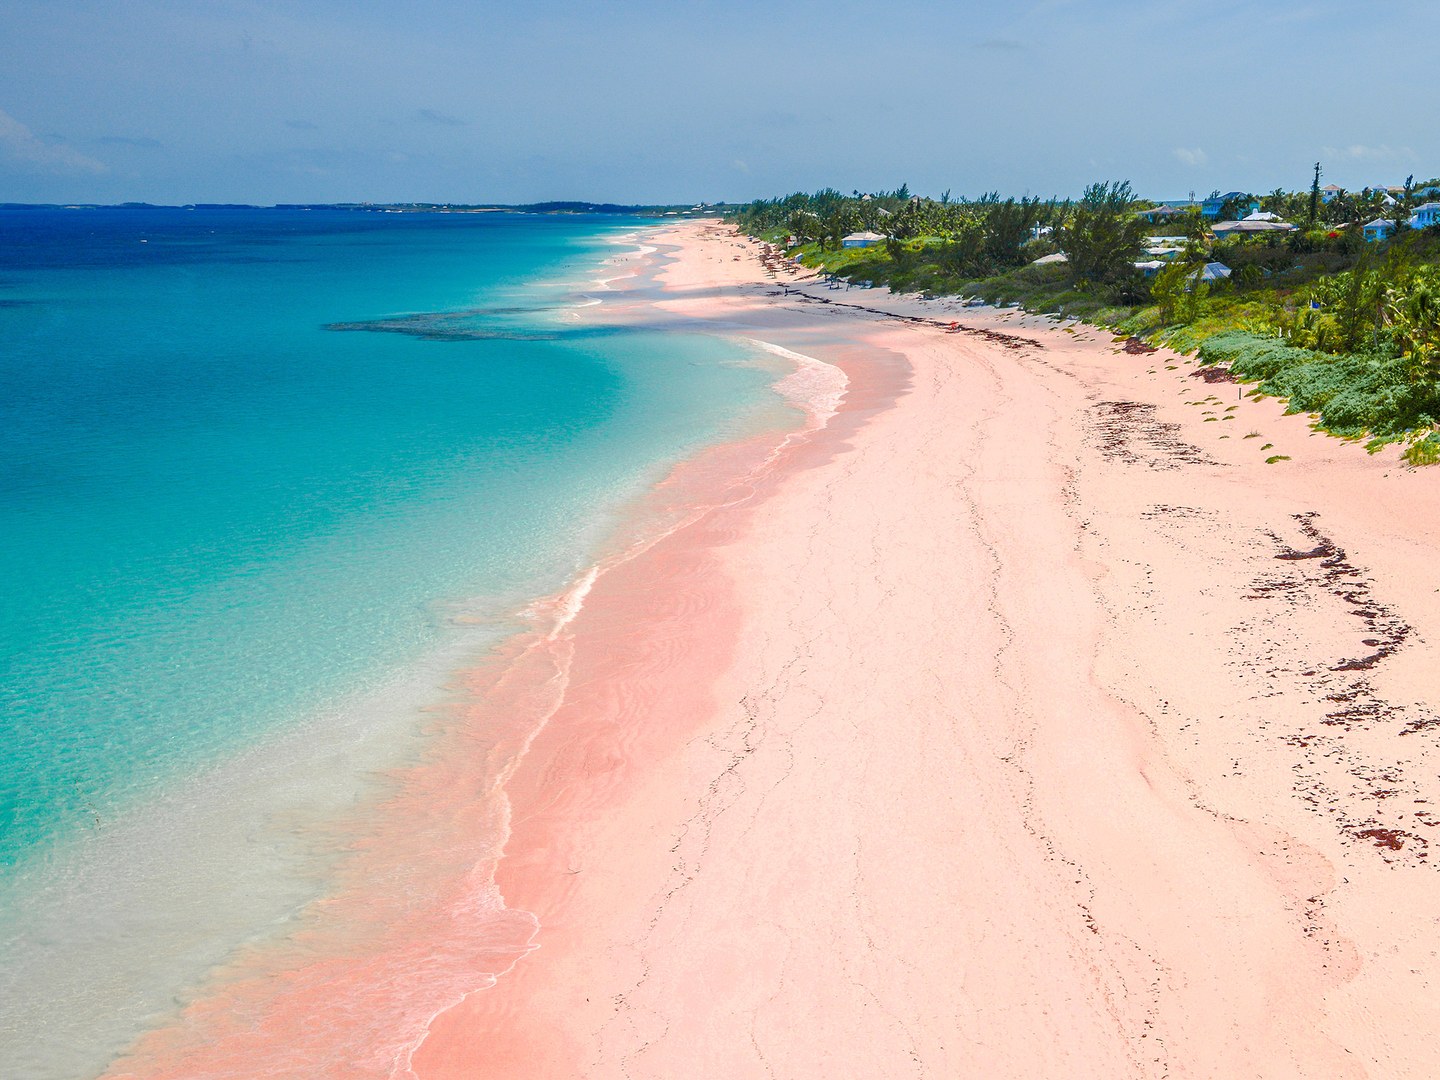 colorful beaches harbour island cr getty